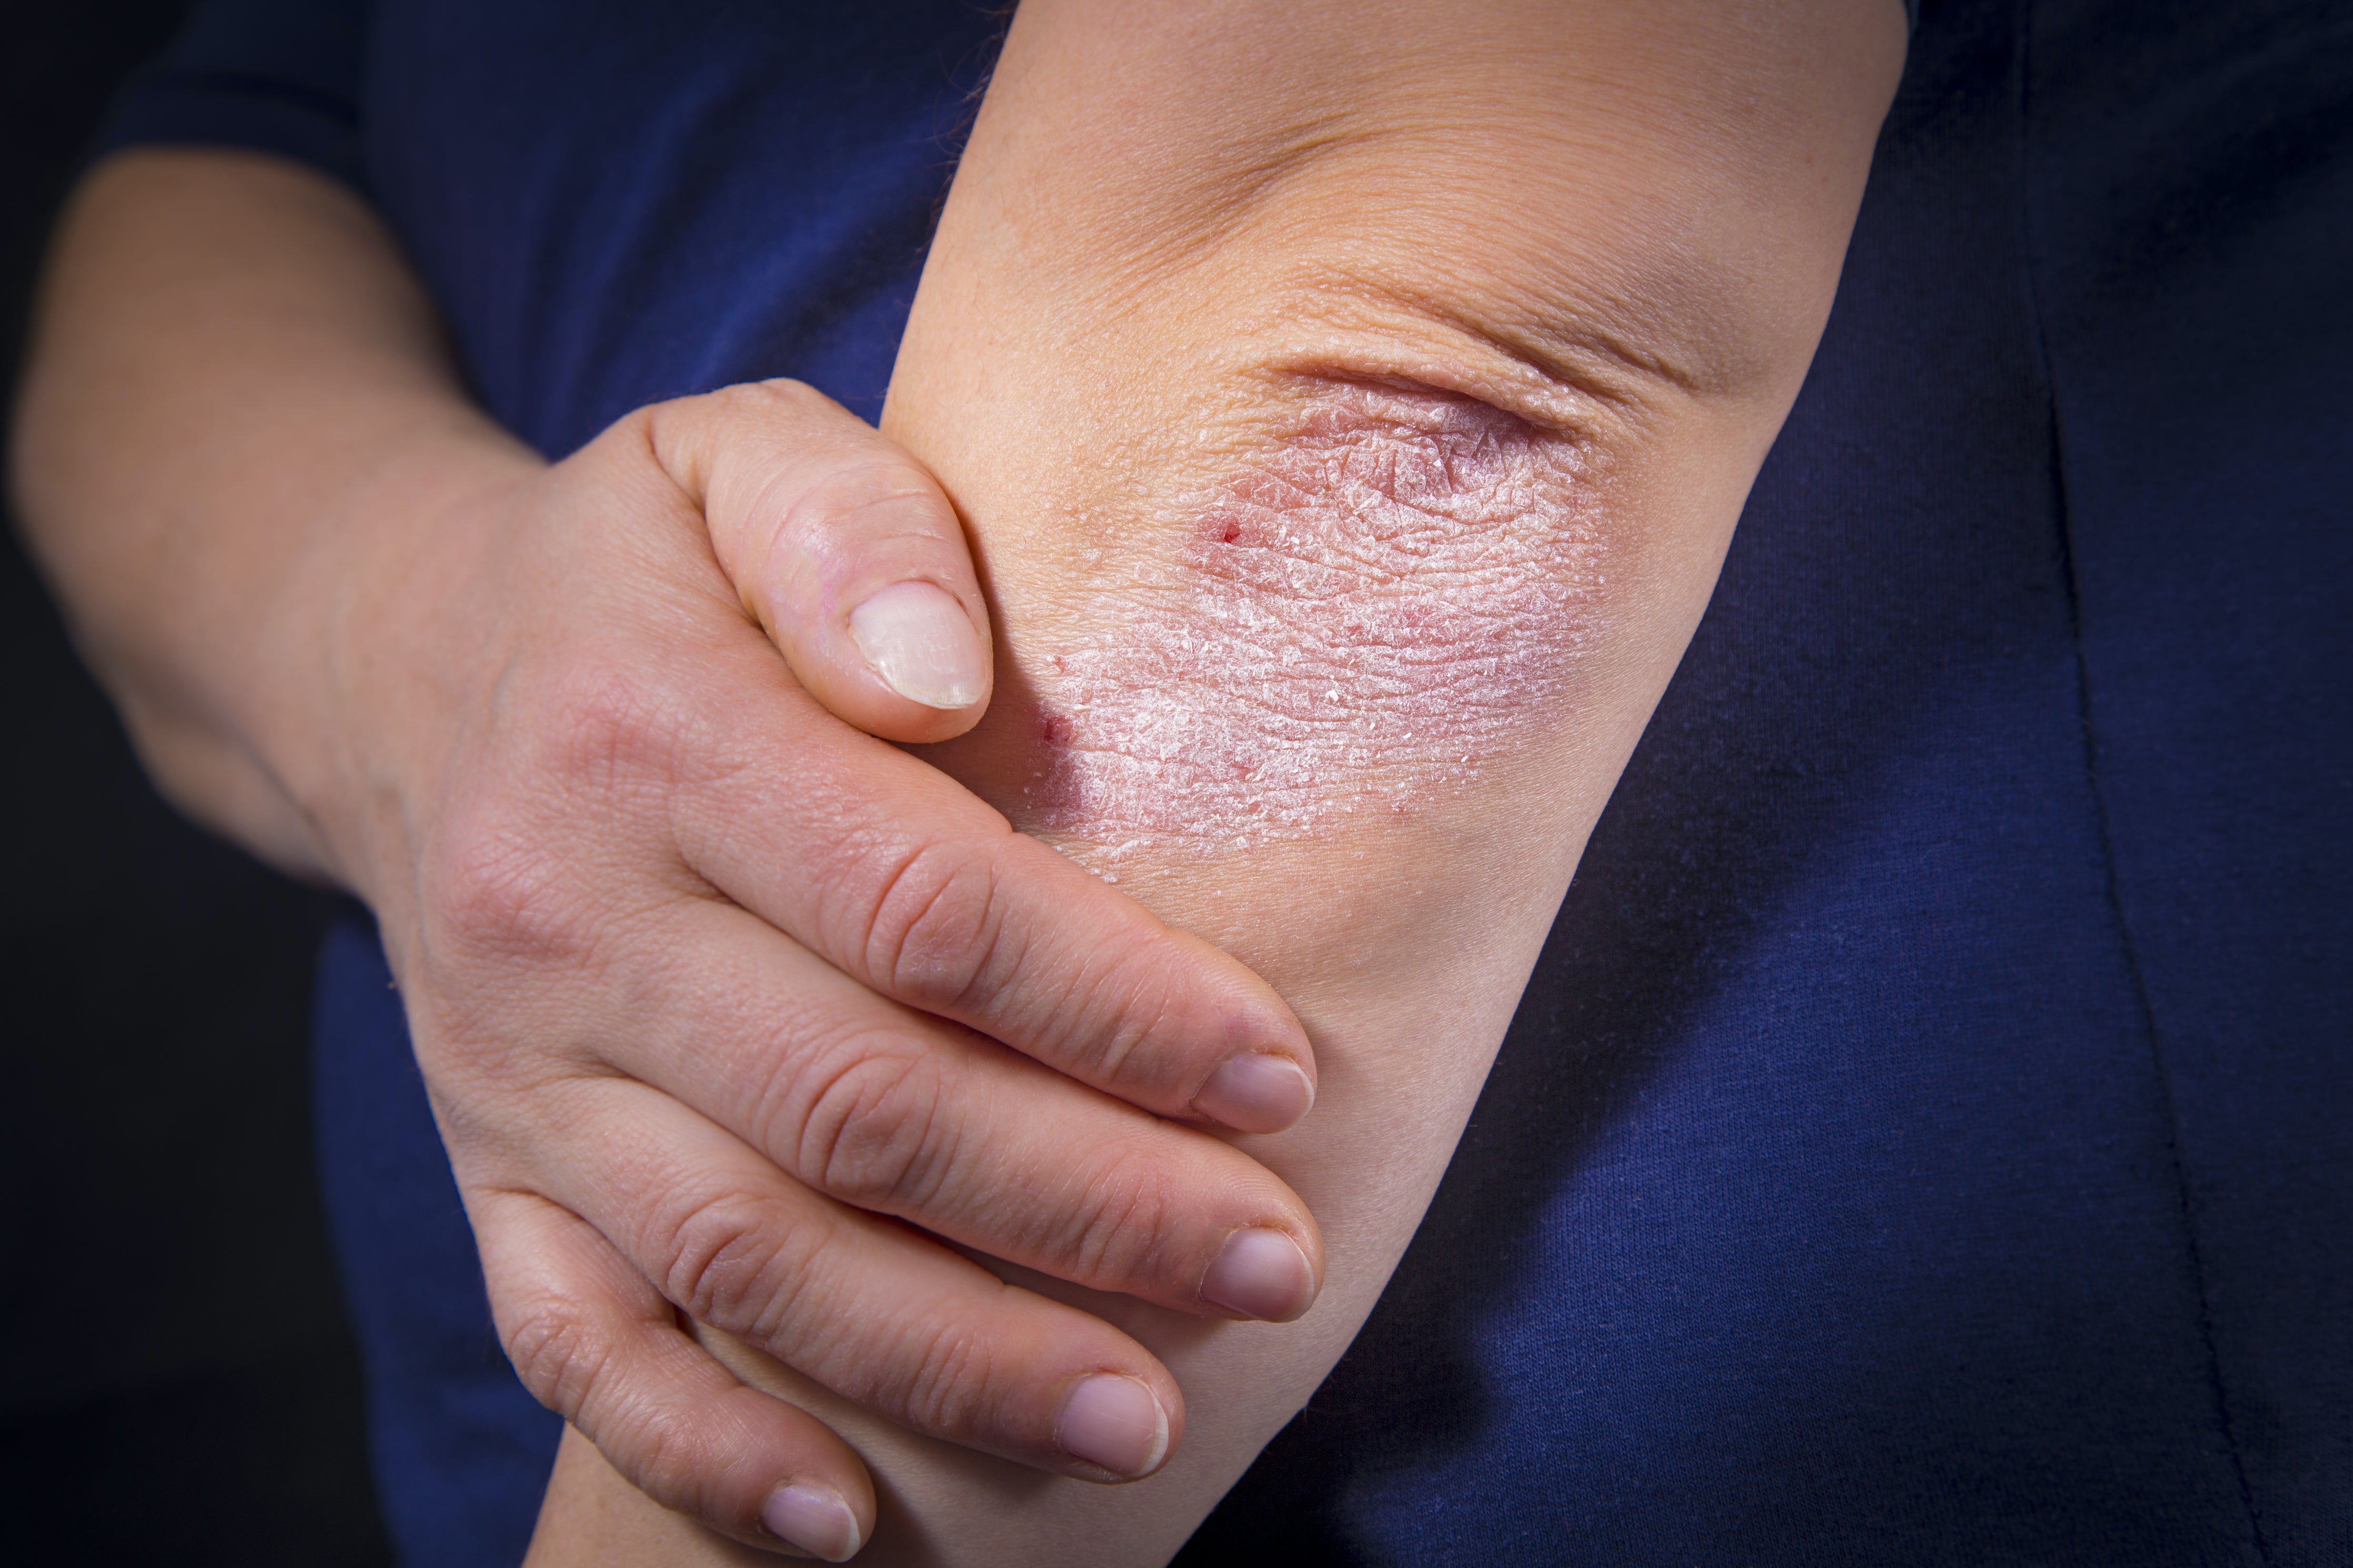 Debunking misconceptions about psoriasis